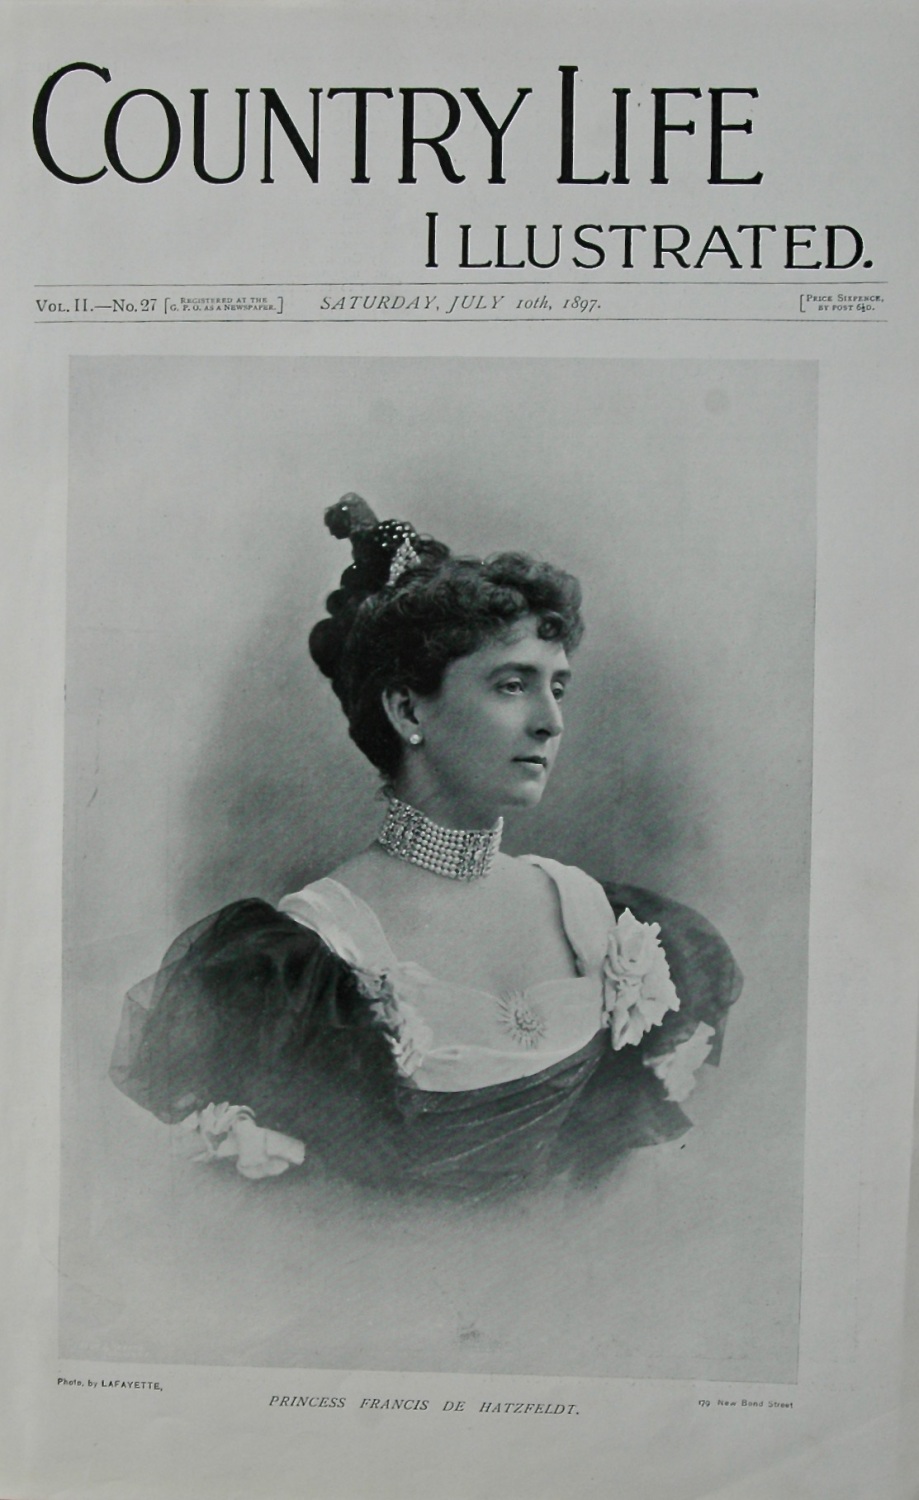 Original front page from Country Life 1897